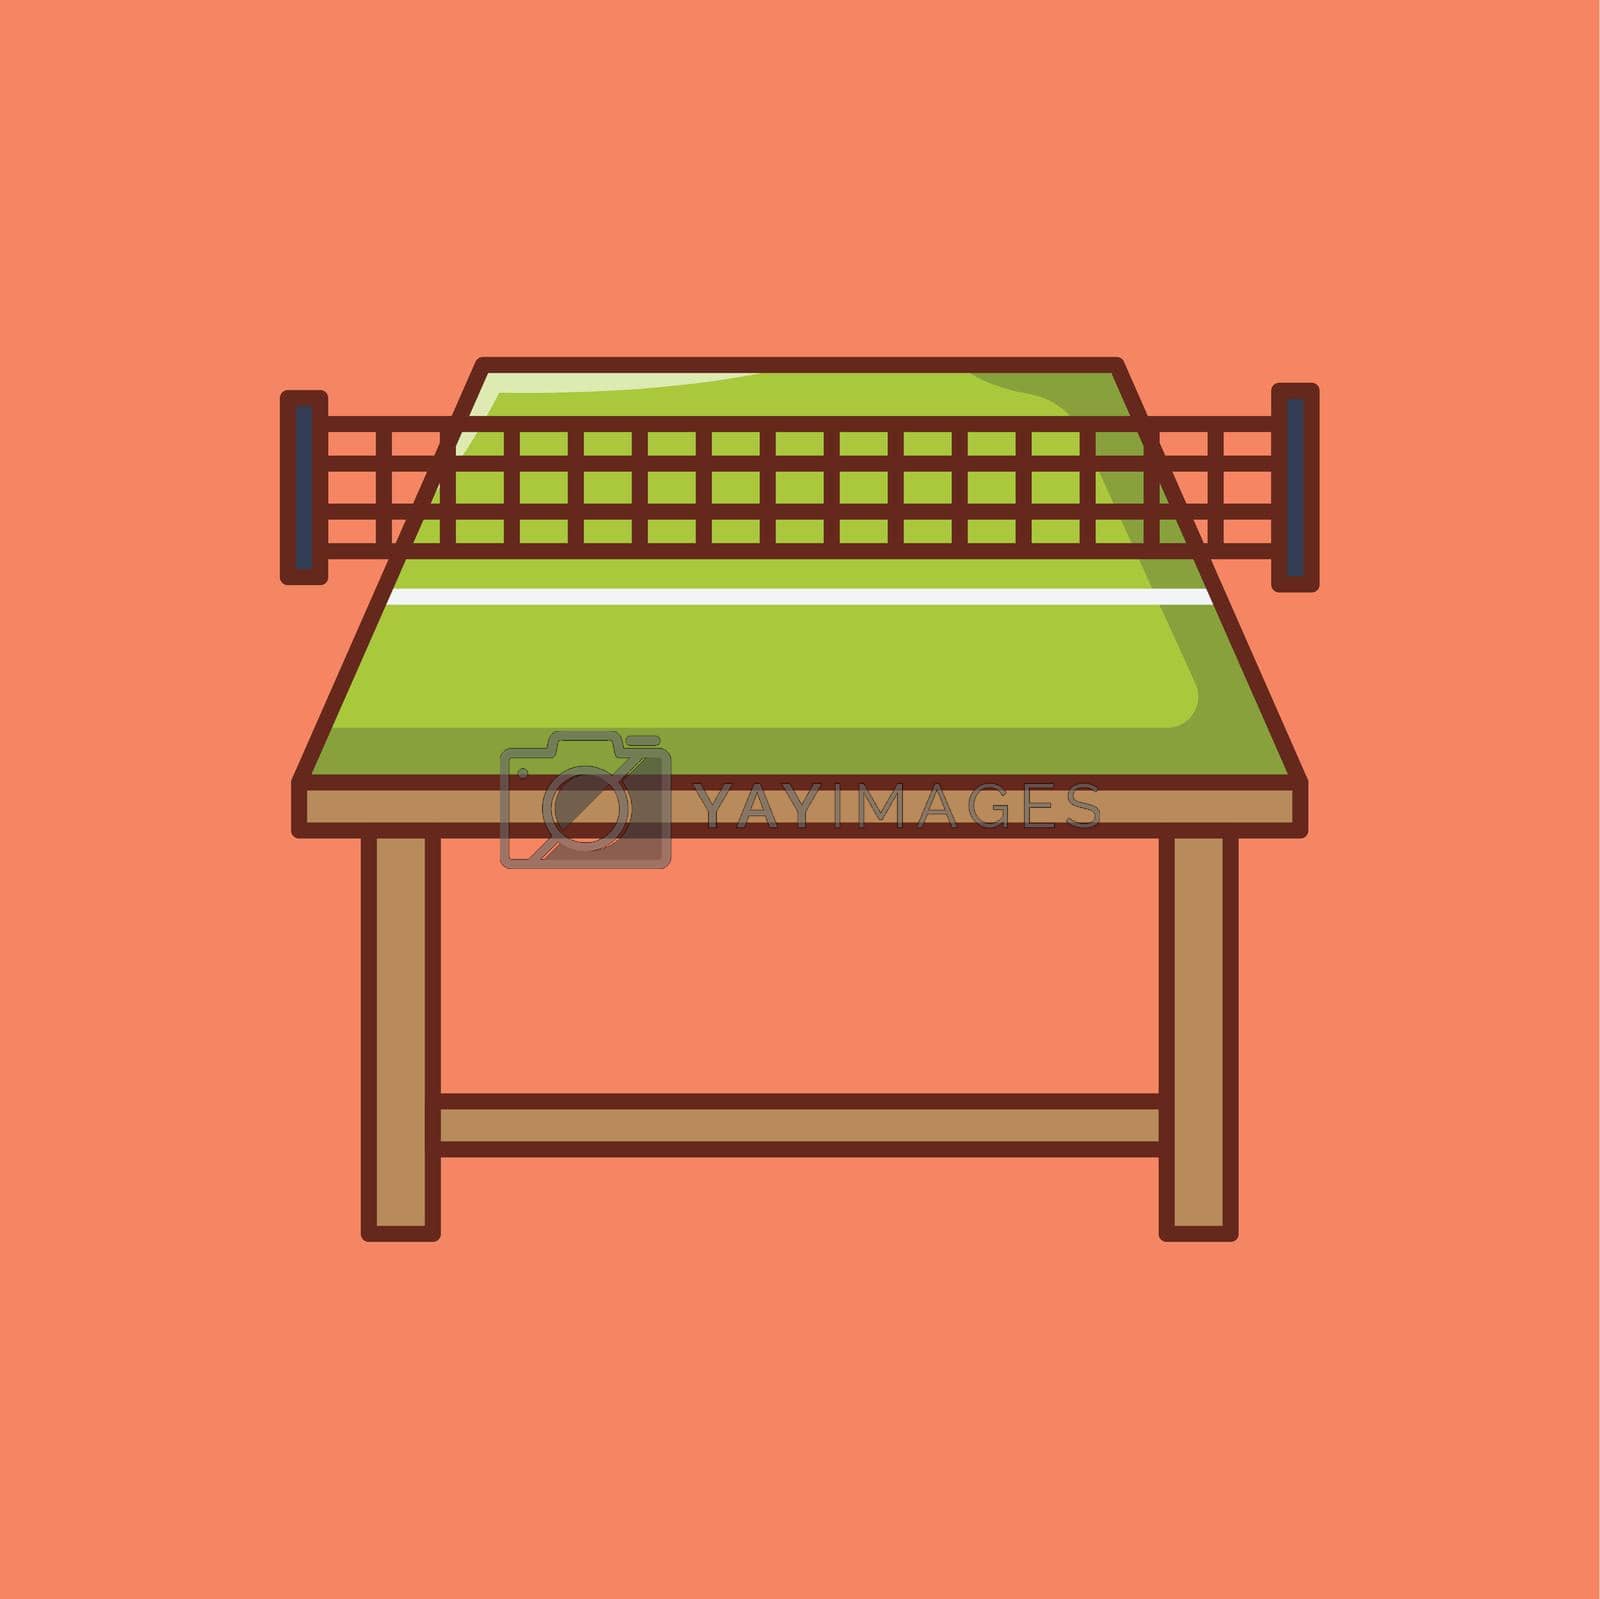 Royalty free image of tennis by vectorstall